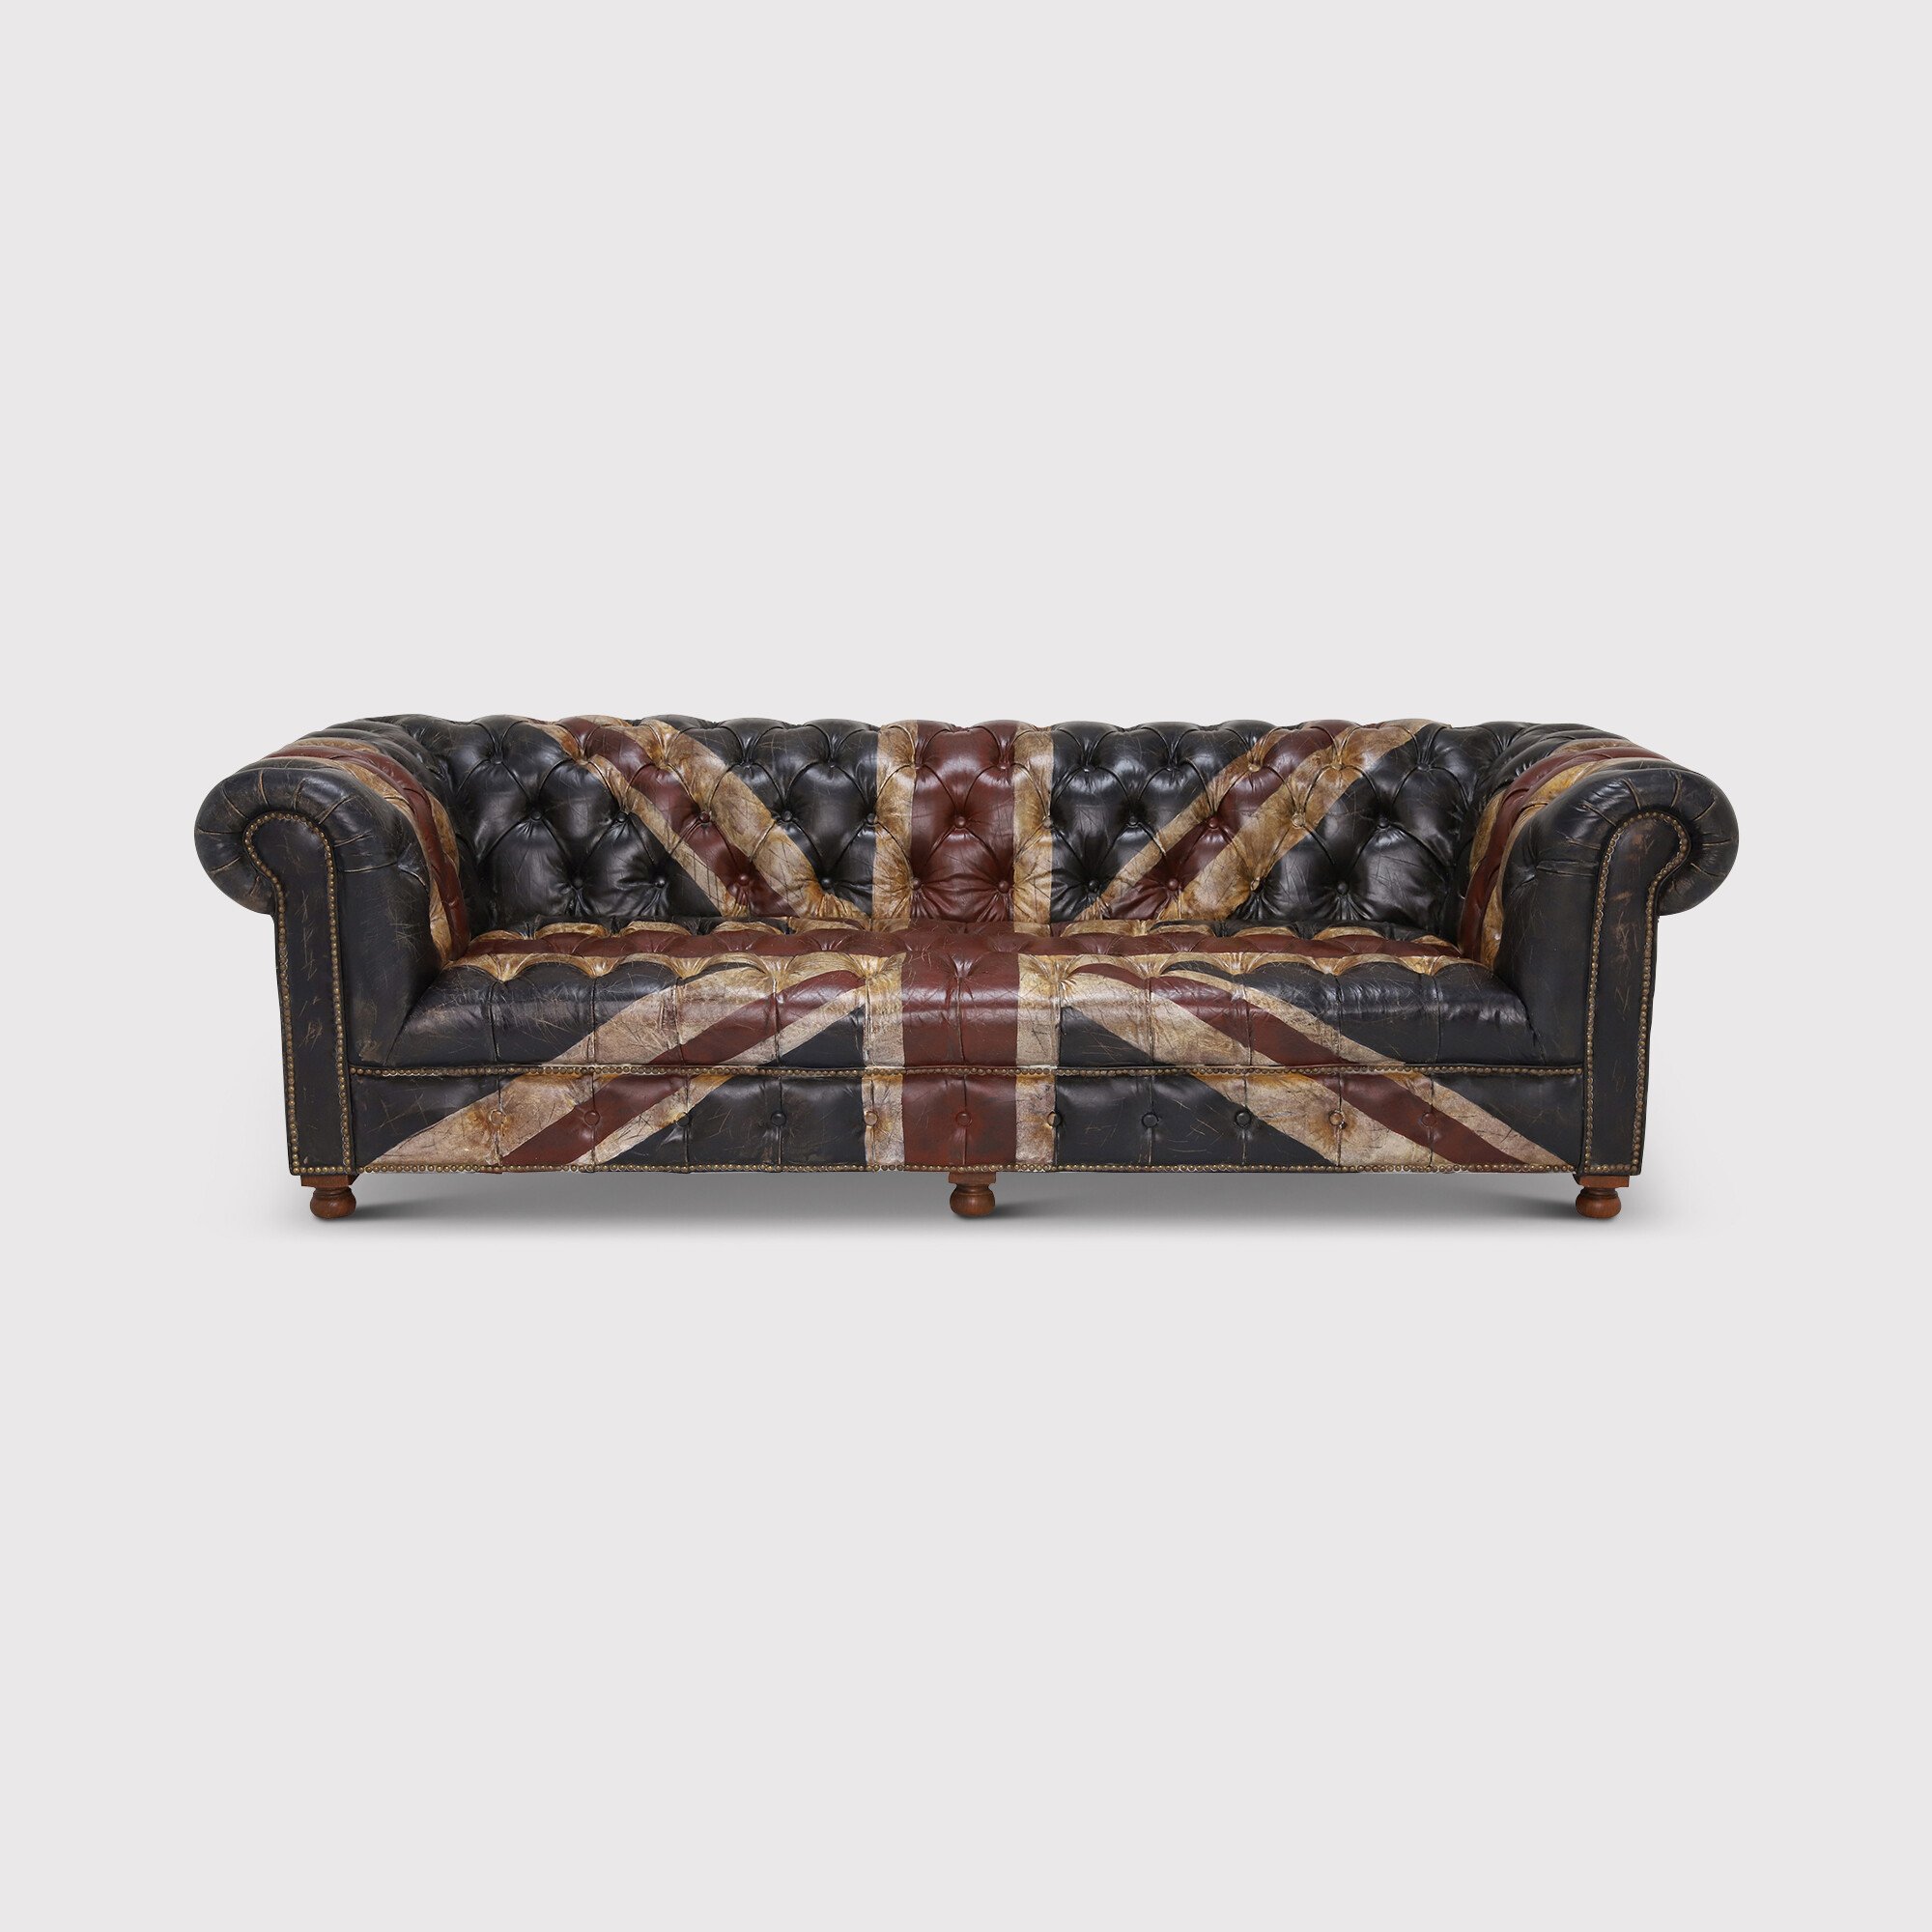 Timothy Oulton Westminster Button Chesterfield Sofa 3 Seater, Navy Leather | Barker & Stonehouse